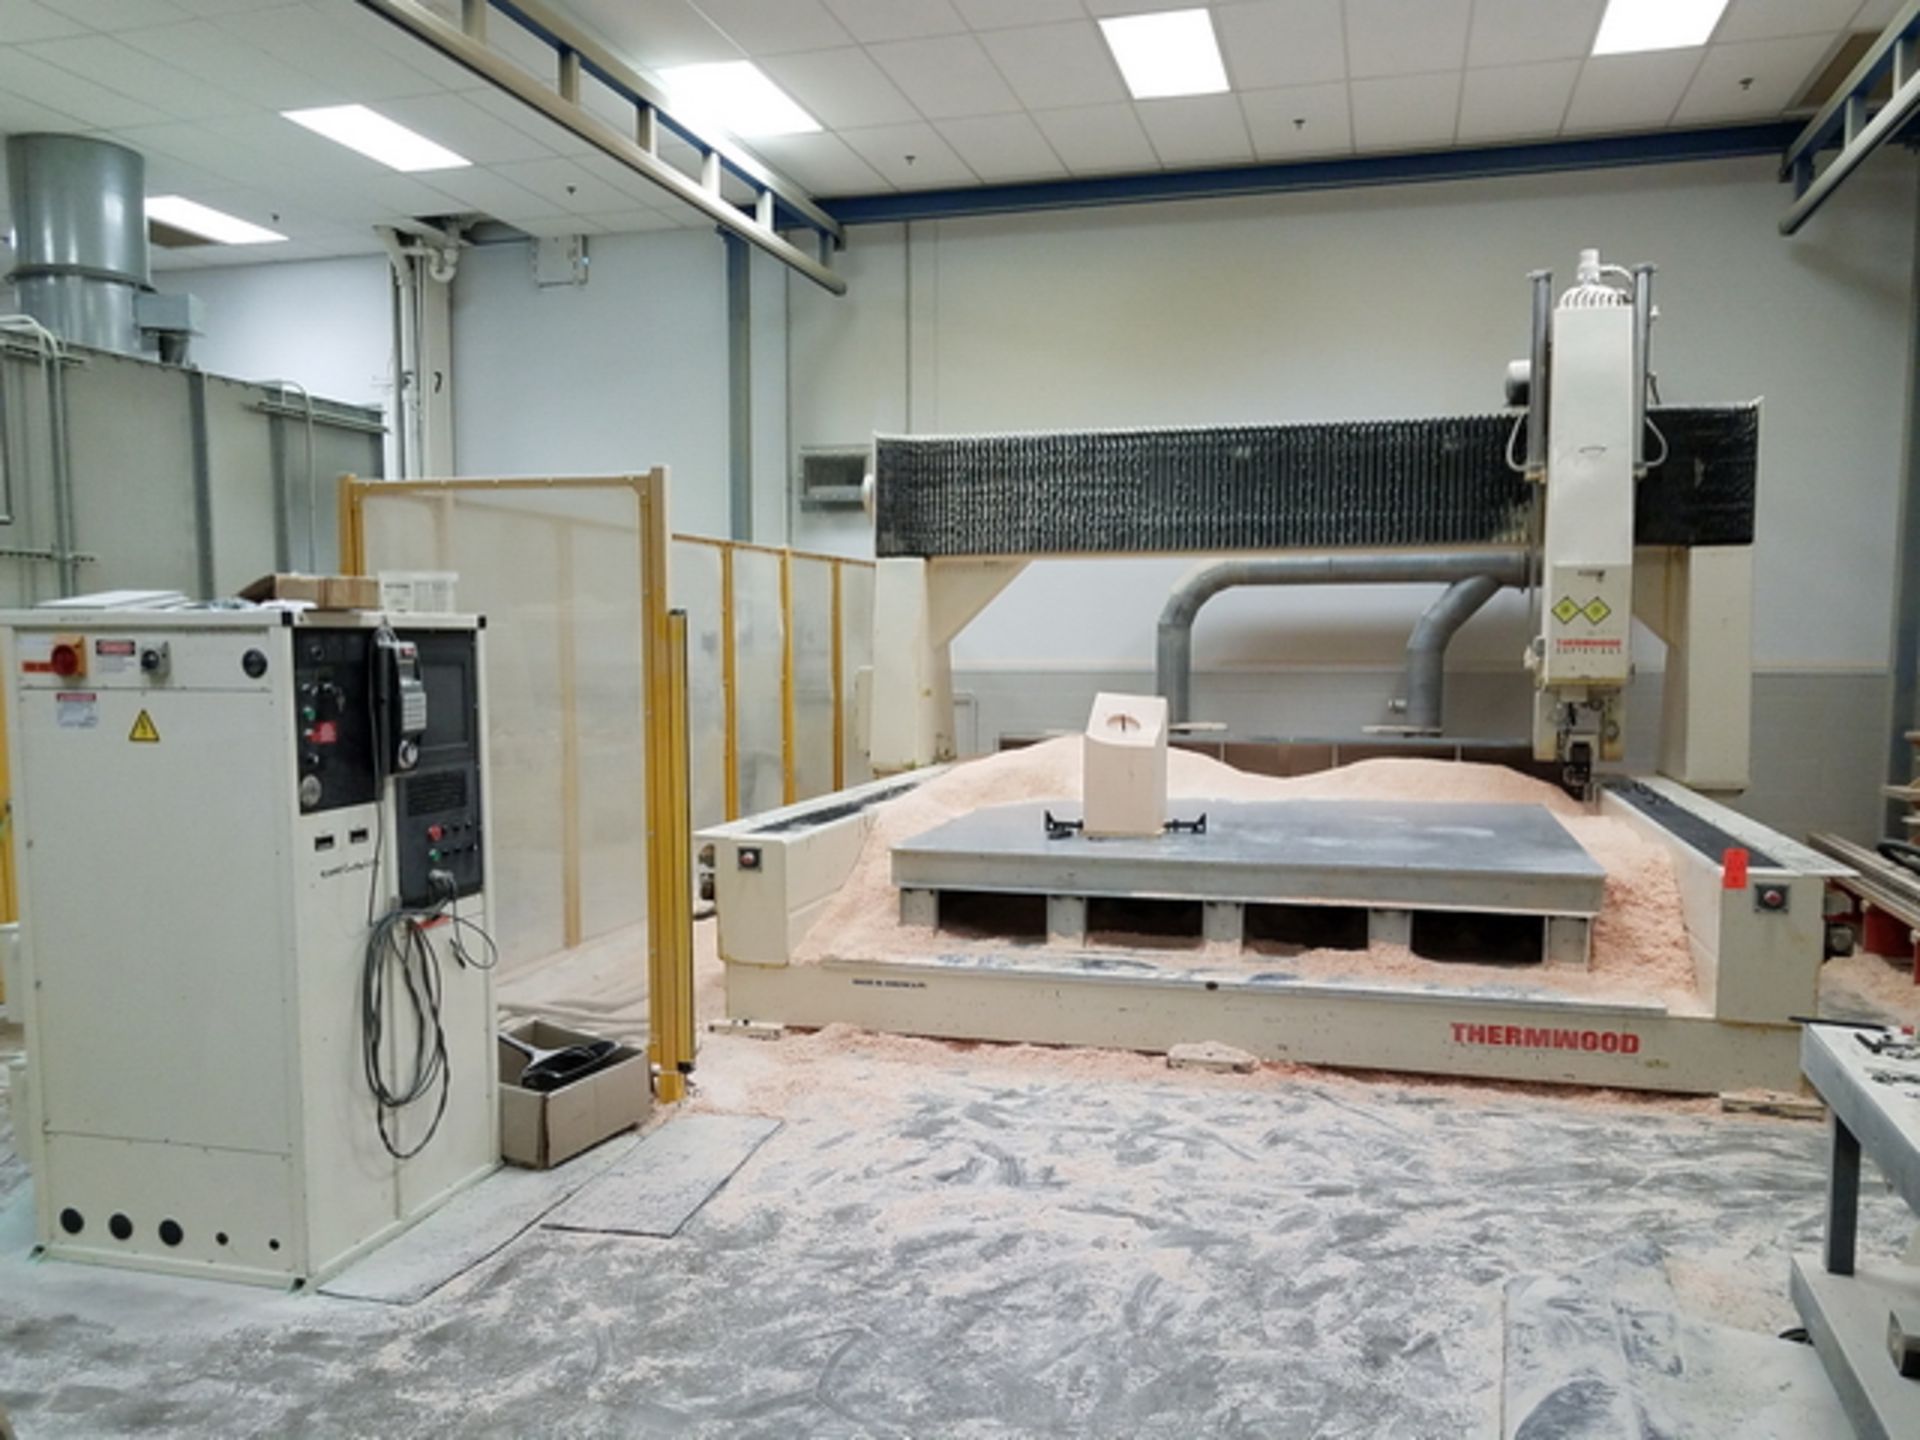 Thermwood C-72 5-Axis CNC Router, Gen2 Supercontrol with Cartesian 5" Remote, Showing 110034 hrs, - Image 3 of 5